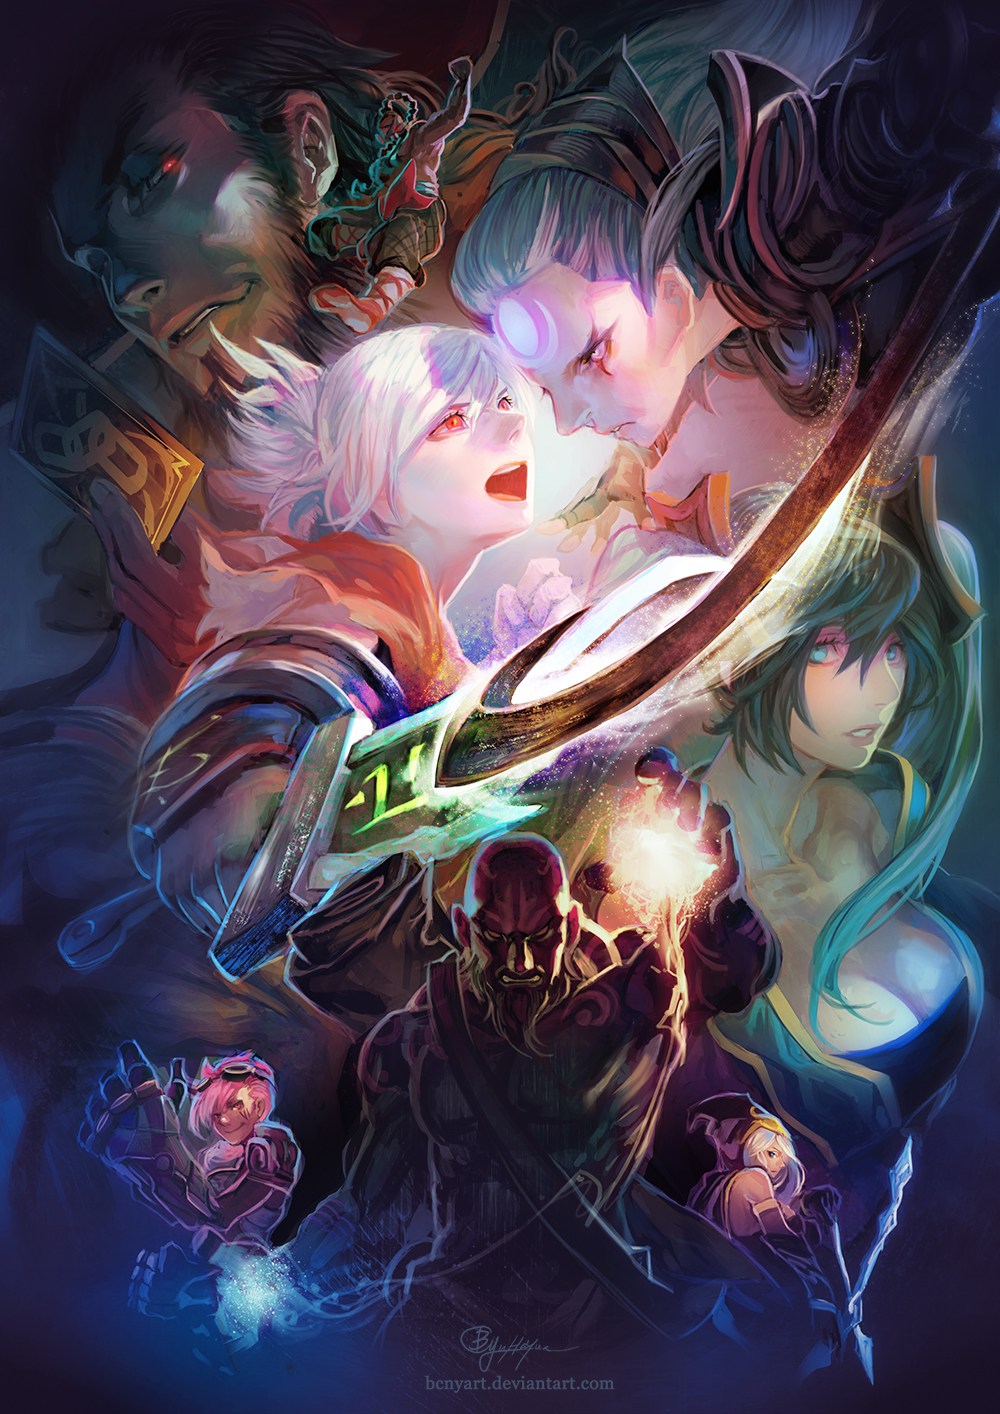 5girls ashe_(league_of_legends) b.c.n.y. beard blue_hair breasts card cleavage diana_(league_of_legends) facial_hair hat highres large_breasts league_of_legends lee_sin long_hair multiple_boys multiple_girls pink_hair red_eyes riven_(league_of_legends) ryze short_hair sona_buvelle sword tattoo twisted_fate vi_(league_of_legends) weapon white_hair